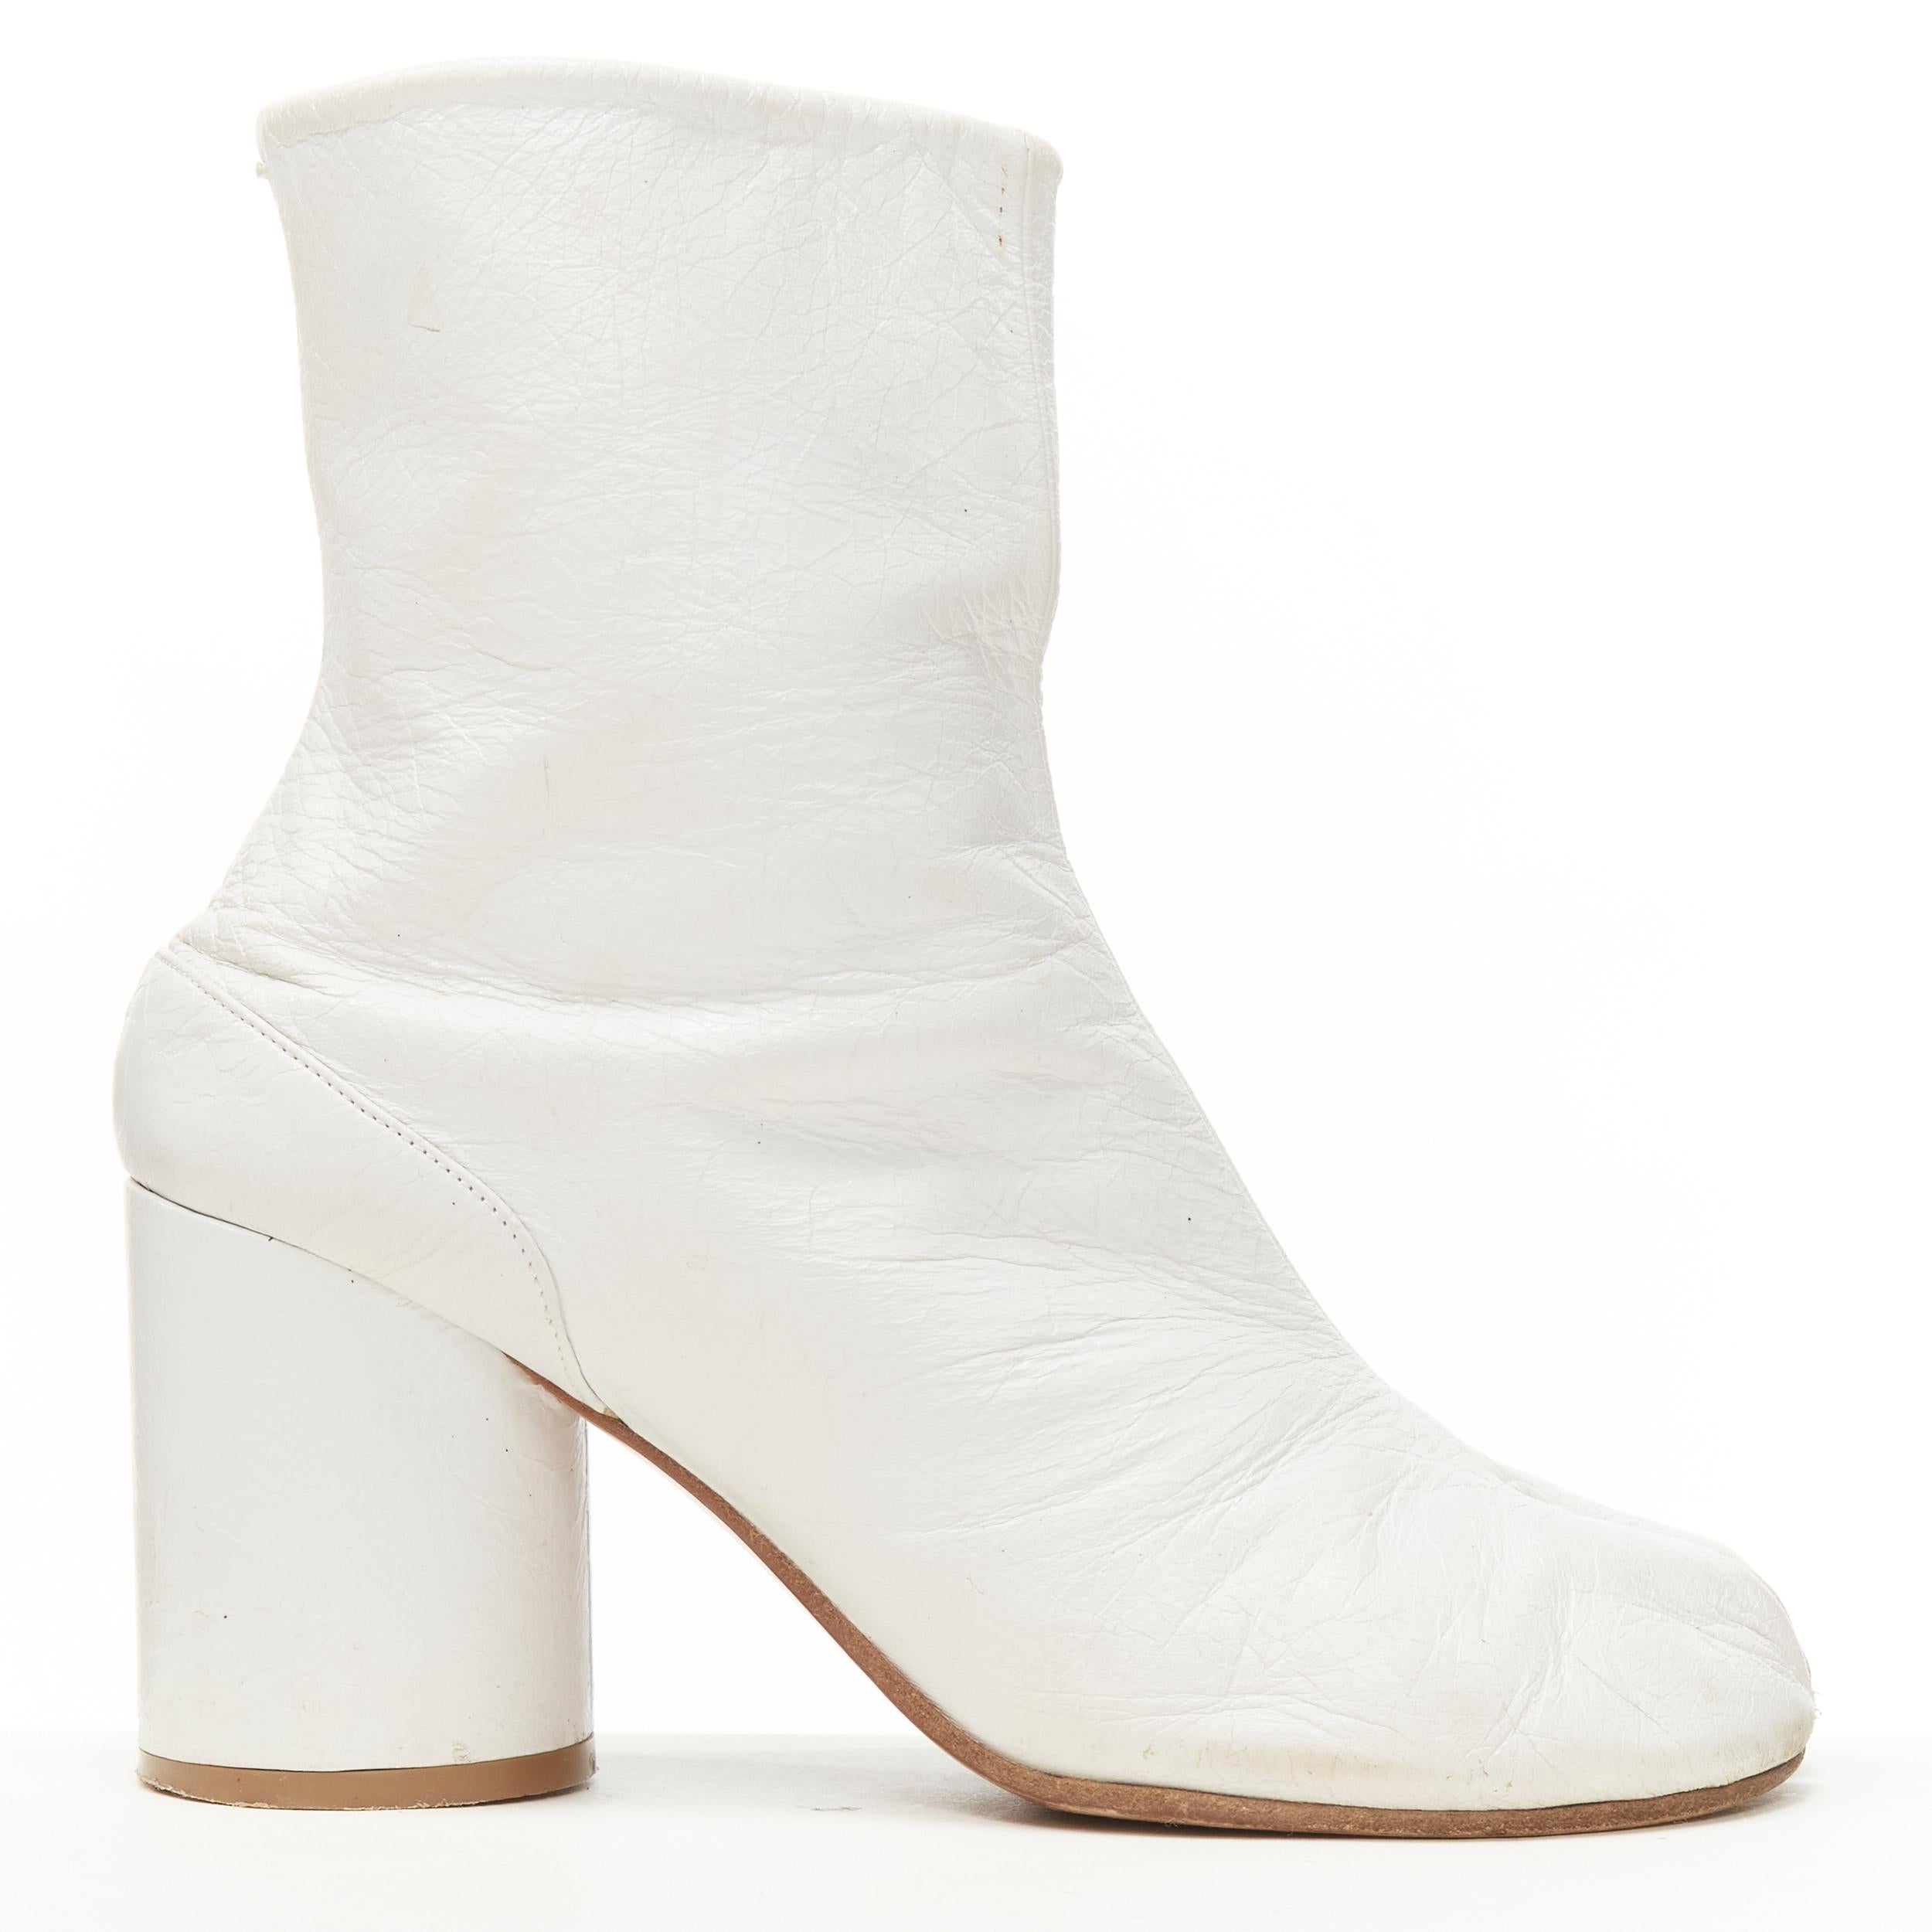 MAISON MARGIELA TAbi white crinkled leather cone heel ankle boot EU36 

Reference: JACG/A00067 
Brand: Maison Margiela 
Material: Leather 
Color: White 
Pattern: Solid 
Closure: Hook Bar 
Extra Detail: Signature split toe. Cone heel. Crinkled soft